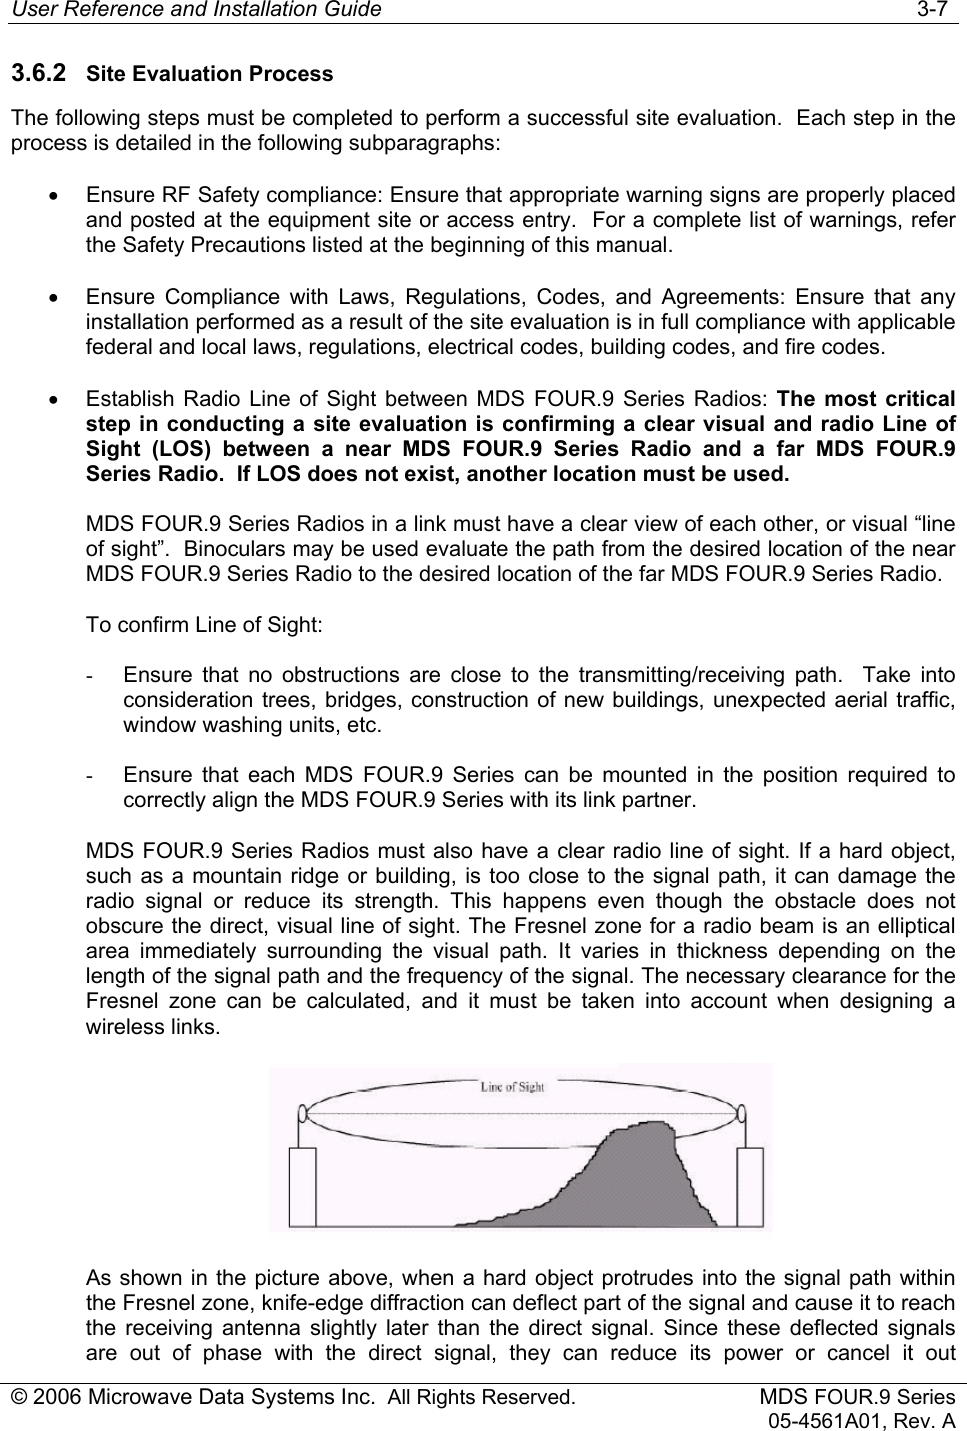 User Reference and Installation Guide   3-7 © 2006 Microwave Data Systems Inc.  All Rights Reserved. MDS FOUR.9 Series 05-4561A01, Rev. A 3.6.2  Site Evaluation Process The following steps must be completed to perform a successful site evaluation.  Each step in the process is detailed in the following subparagraphs: •  Ensure RF Safety compliance: Ensure that appropriate warning signs are properly placed and posted at the equipment site or access entry.  For a complete list of warnings, refer the Safety Precautions listed at the beginning of this manual. •  Ensure Compliance with Laws, Regulations, Codes, and Agreements: Ensure that any installation performed as a result of the site evaluation is in full compliance with applicable federal and local laws, regulations, electrical codes, building codes, and fire codes. •  Establish Radio Line of Sight between MDS FOUR.9 Series Radios: The most critical step in conducting a site evaluation is confirming a clear visual and radio Line of Sight (LOS) between a near MDS FOUR.9 Series Radio and a far MDS FOUR.9 Series Radio.  If LOS does not exist, another location must be used. MDS FOUR.9 Series Radios in a link must have a clear view of each other, or visual “line of sight”.  Binoculars may be used evaluate the path from the desired location of the near MDS FOUR.9 Series Radio to the desired location of the far MDS FOUR.9 Series Radio. To confirm Line of Sight: -  Ensure that no obstructions are close to the transmitting/receiving path.  Take into consideration trees, bridges, construction of new buildings, unexpected aerial traffic, window washing units, etc. -  Ensure that each MDS FOUR.9 Series can be mounted in the position required to correctly align the MDS FOUR.9 Series with its link partner. MDS FOUR.9 Series Radios must also have a clear radio line of sight. If a hard object, such as a mountain ridge or building, is too close to the signal path, it can damage the radio signal or reduce its strength. This happens even though the obstacle does not obscure the direct, visual line of sight. The Fresnel zone for a radio beam is an elliptical area immediately surrounding the visual path. It varies in thickness depending on the length of the signal path and the frequency of the signal. The necessary clearance for the Fresnel zone can be calculated, and it must be taken into account when designing a wireless links.   As shown in the picture above, when a hard object protrudes into the signal path within the Fresnel zone, knife-edge diffraction can deflect part of the signal and cause it to reach the receiving antenna slightly later than the direct signal. Since these deflected signals are out of phase with the direct signal, they can reduce its power or cancel it out 